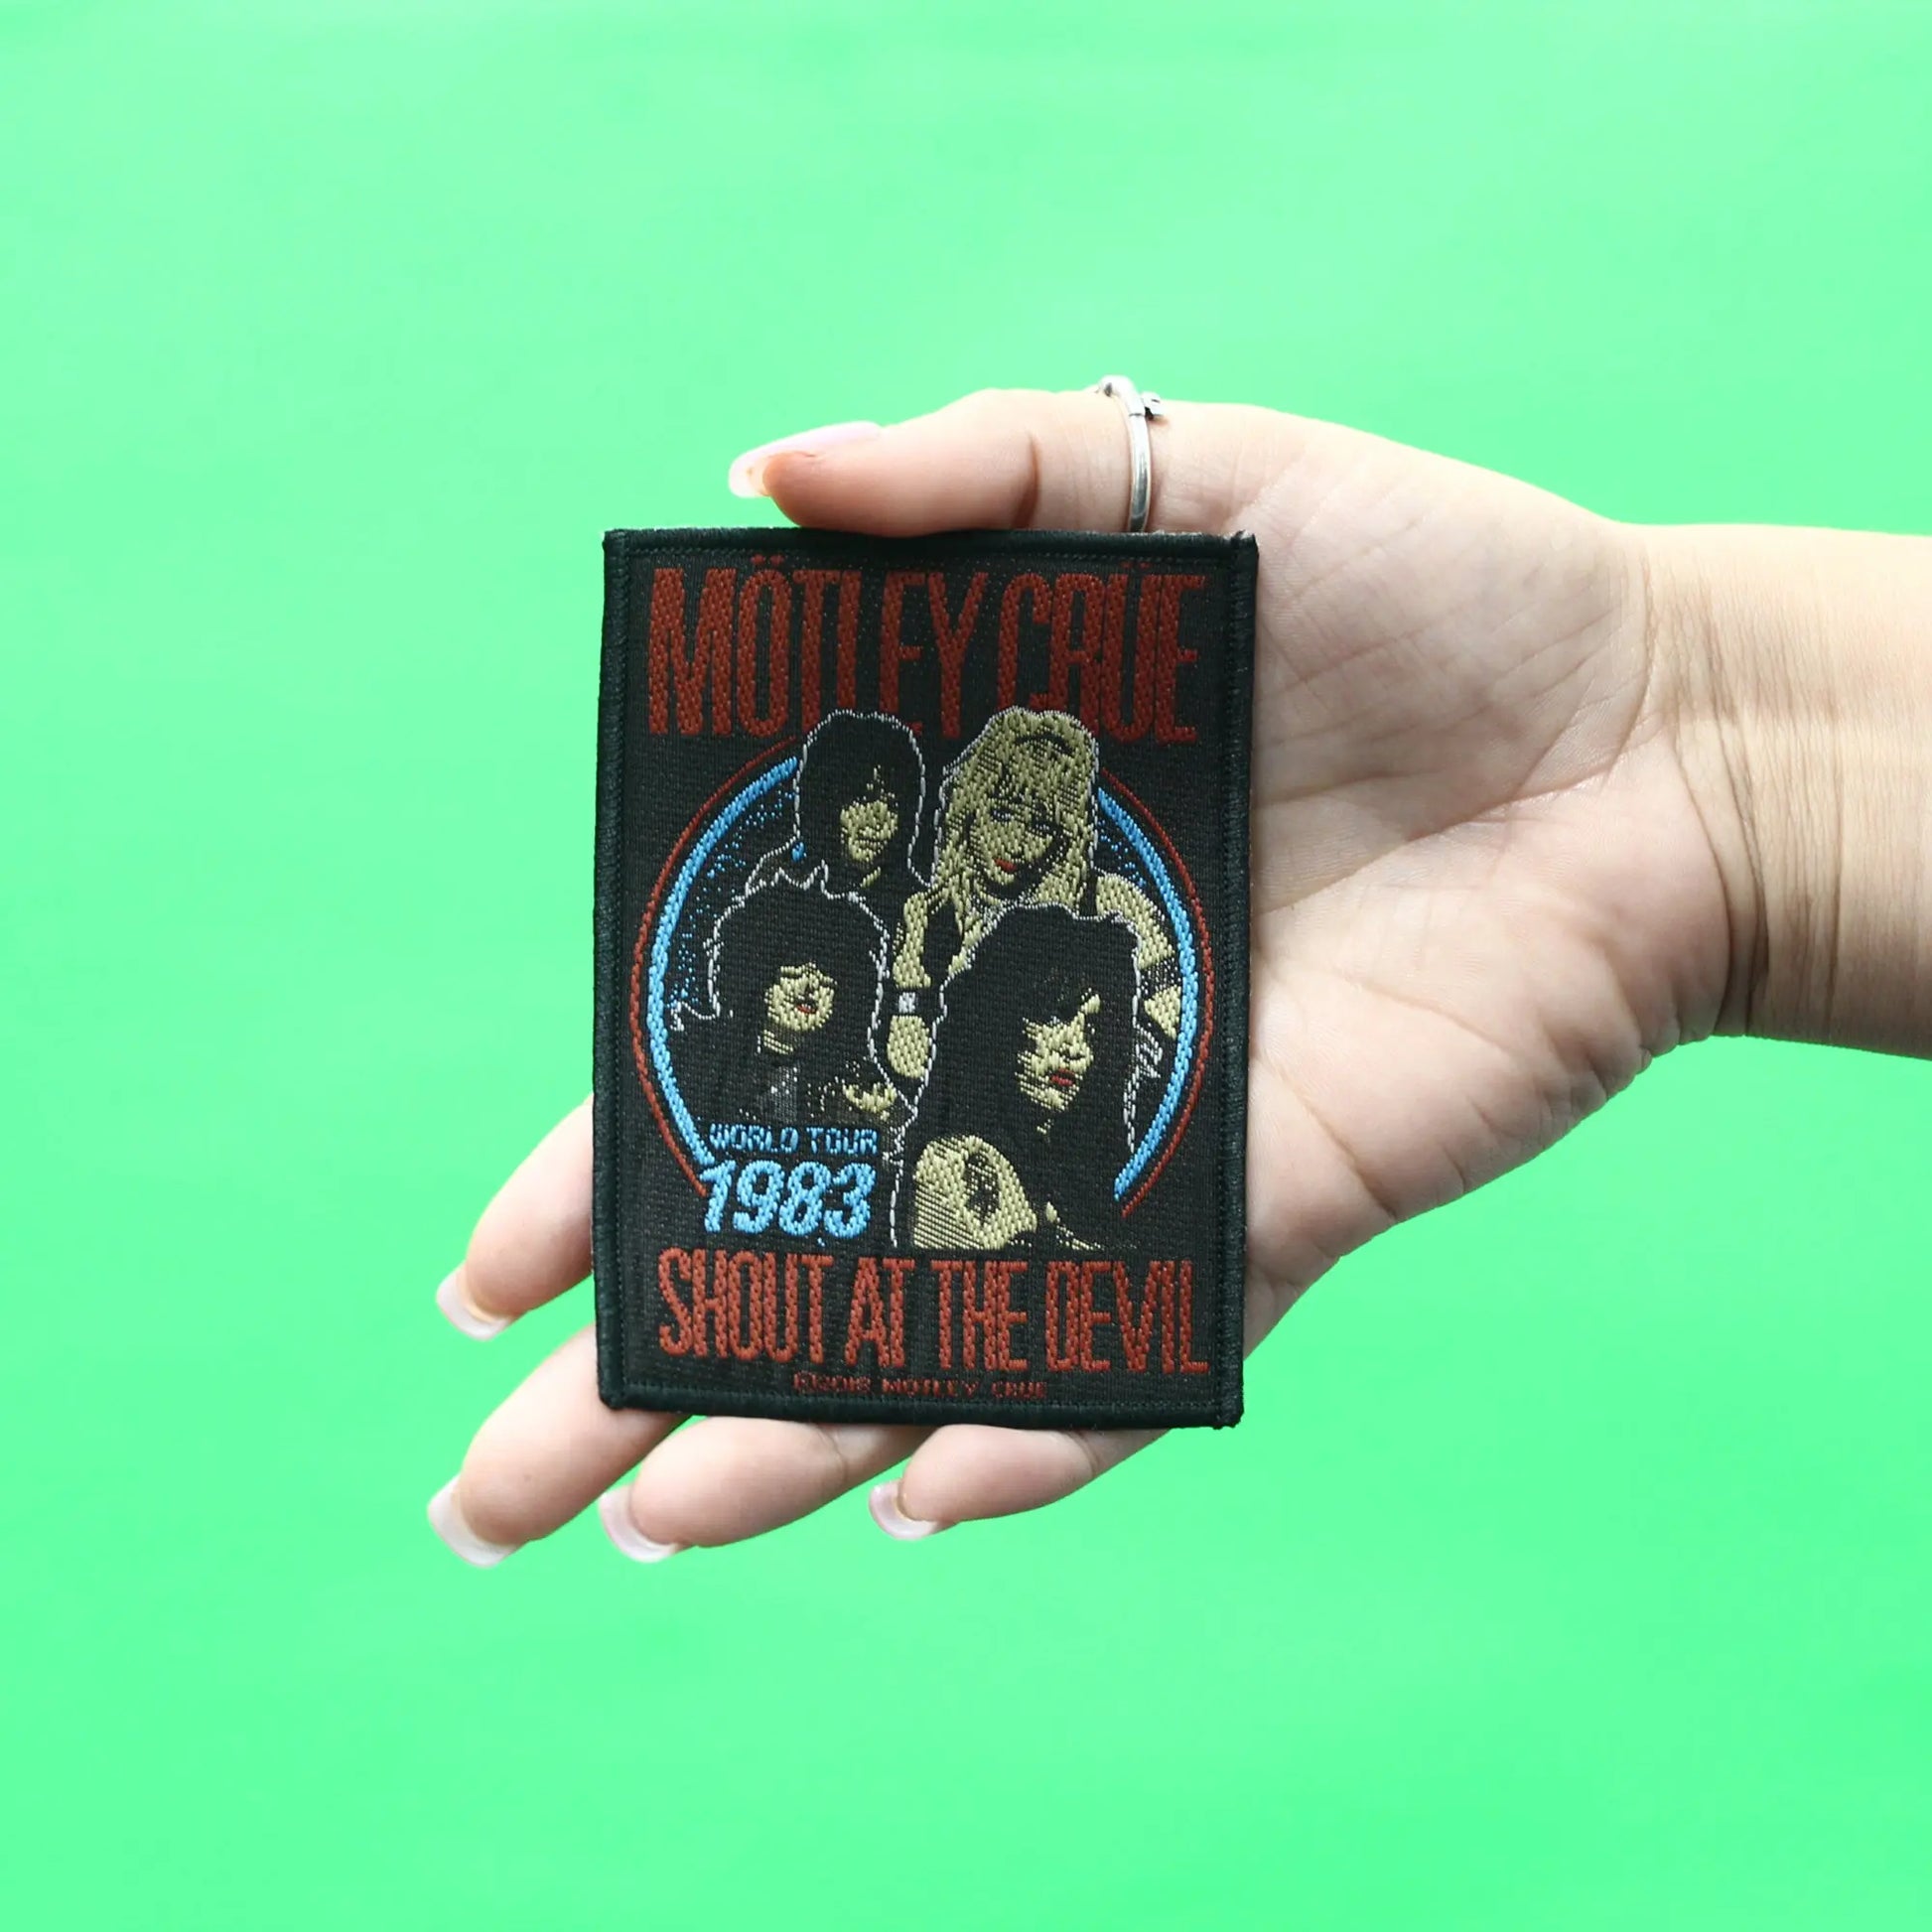 Motley Crue Shout At The Devil Patch 1983 World Tour Woven Iron On